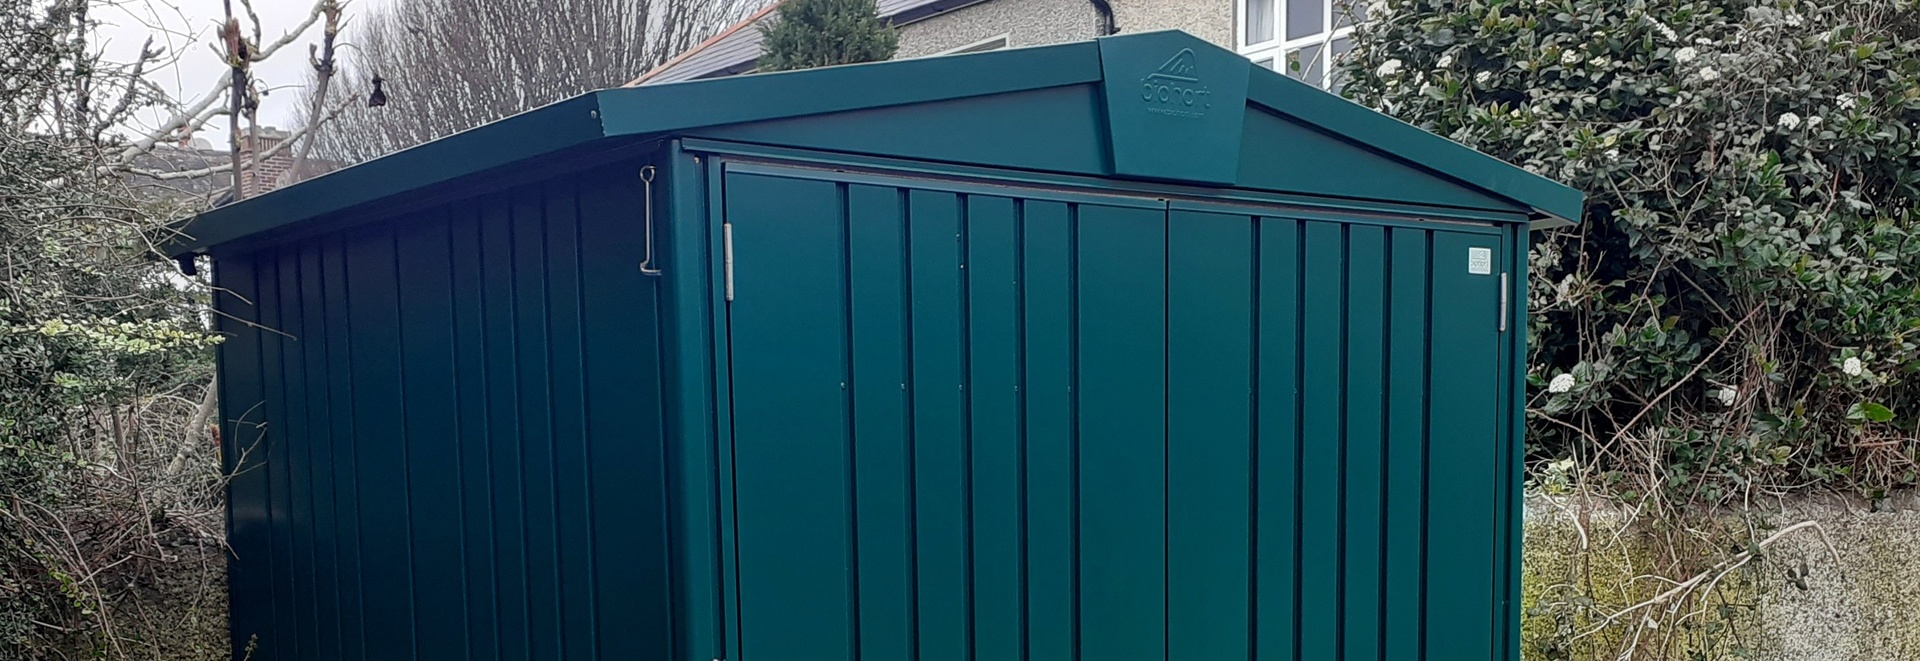 Biohort Europa 2 Garden Shed - quality steel garden shed, blending functionality, durability and classic design  |  Supplied + Fitted in Ranelagh, Dublin 6 by Owen Chubb Landscapers - Ireland's premier Biohort Supplier & Installer.